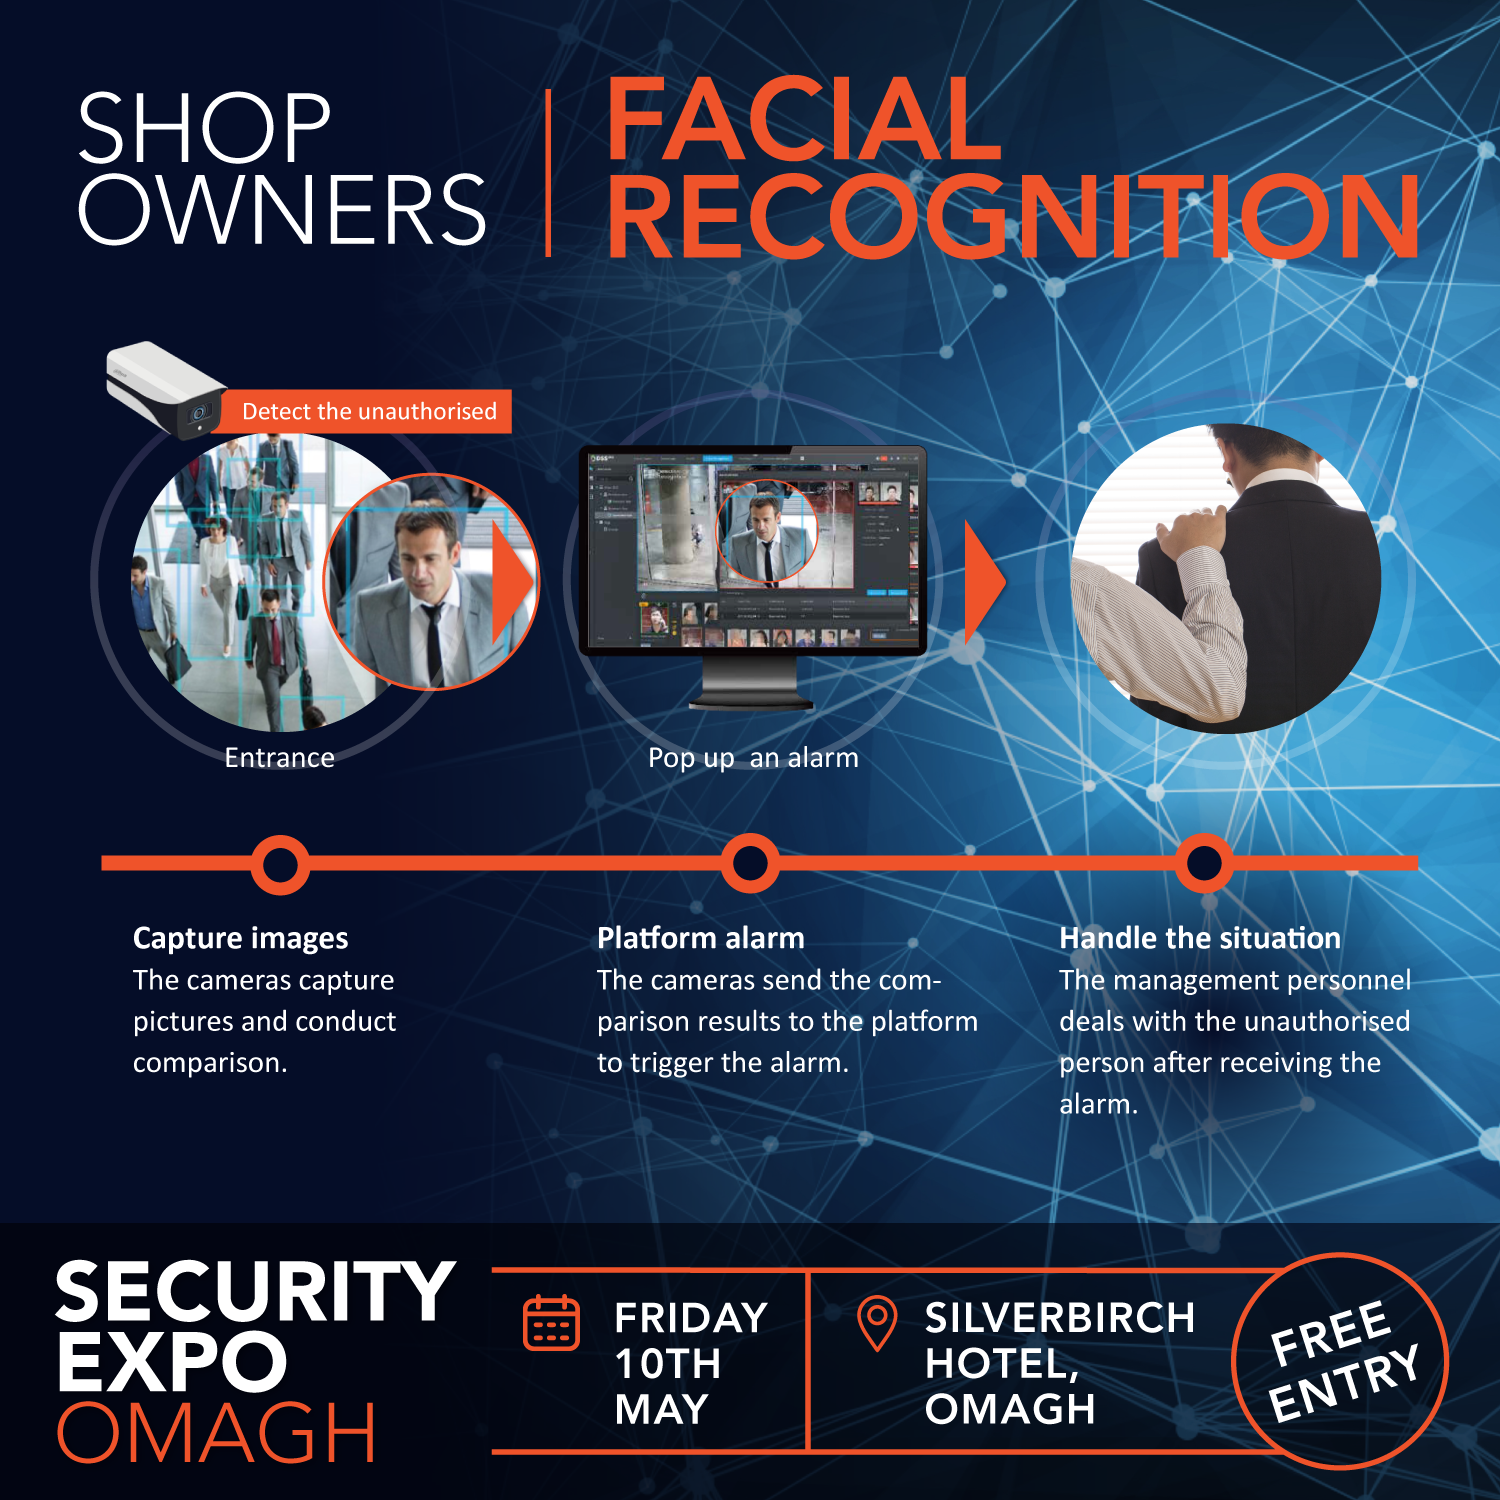 NI’s first security expo to demonstrate key facial recognition facility for retailers